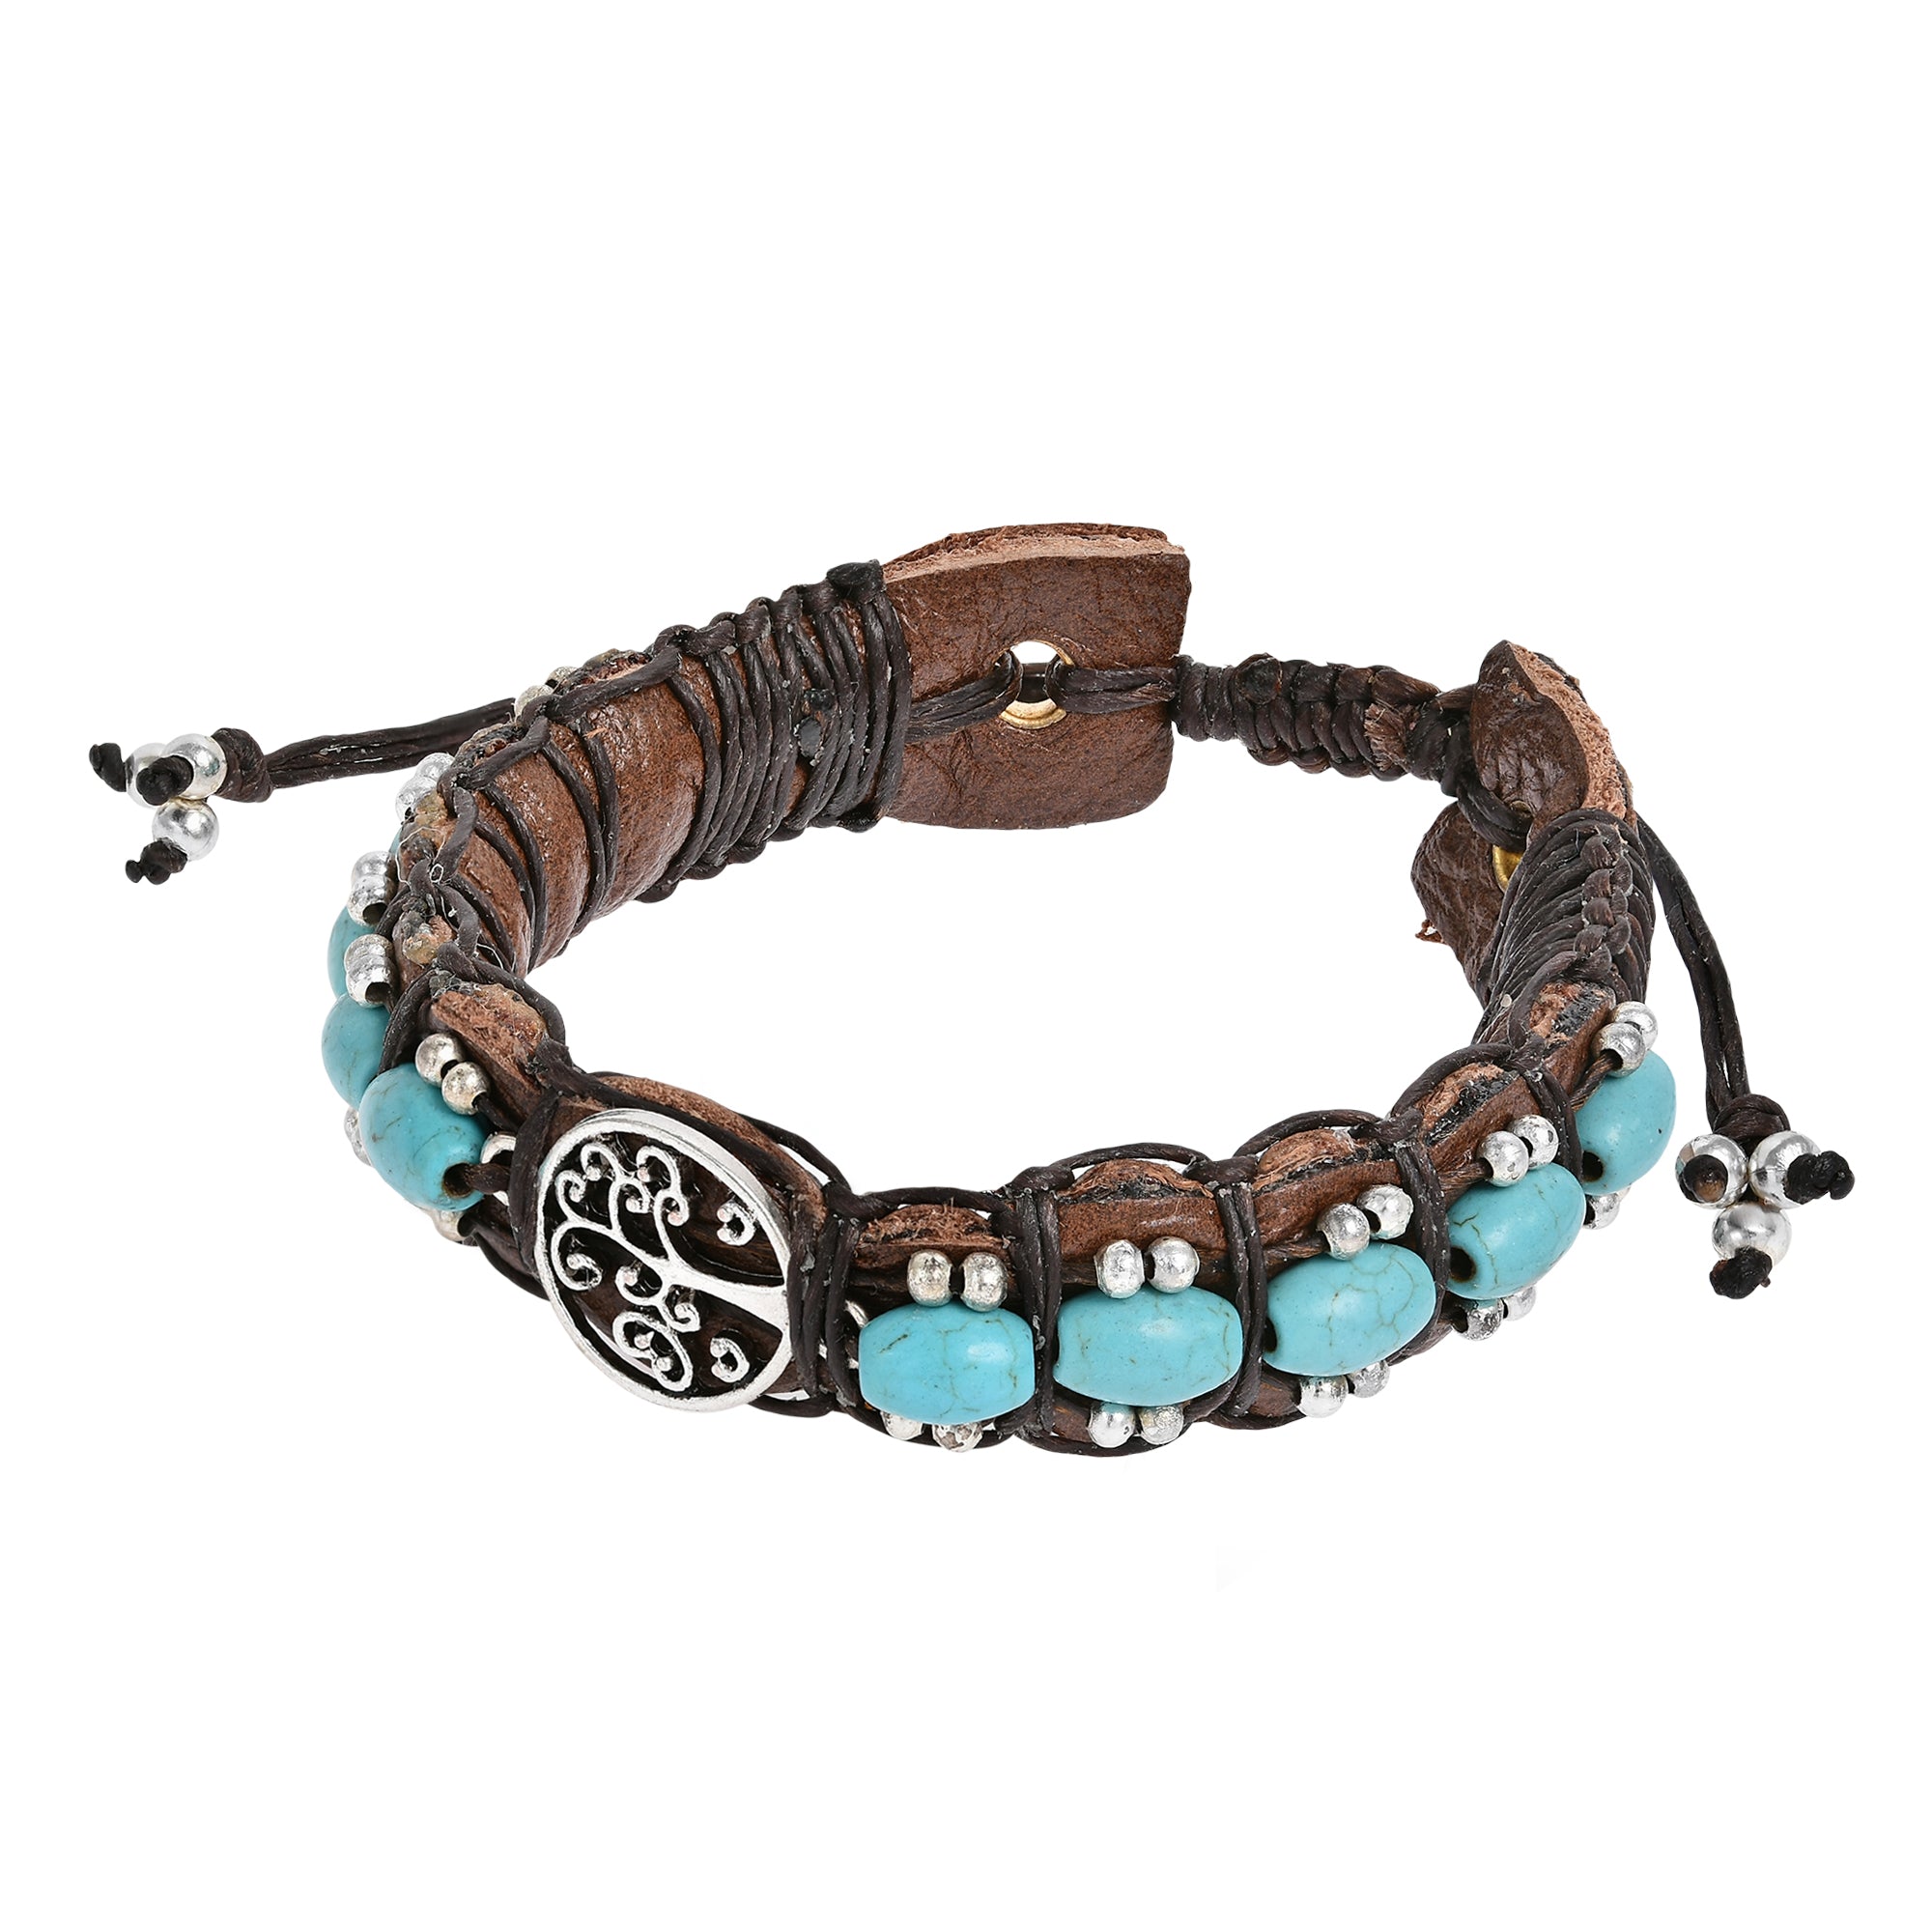 Handcrafted Mystical Tree of Life Symbol Leather Bracelet w/ Turquoise Stones